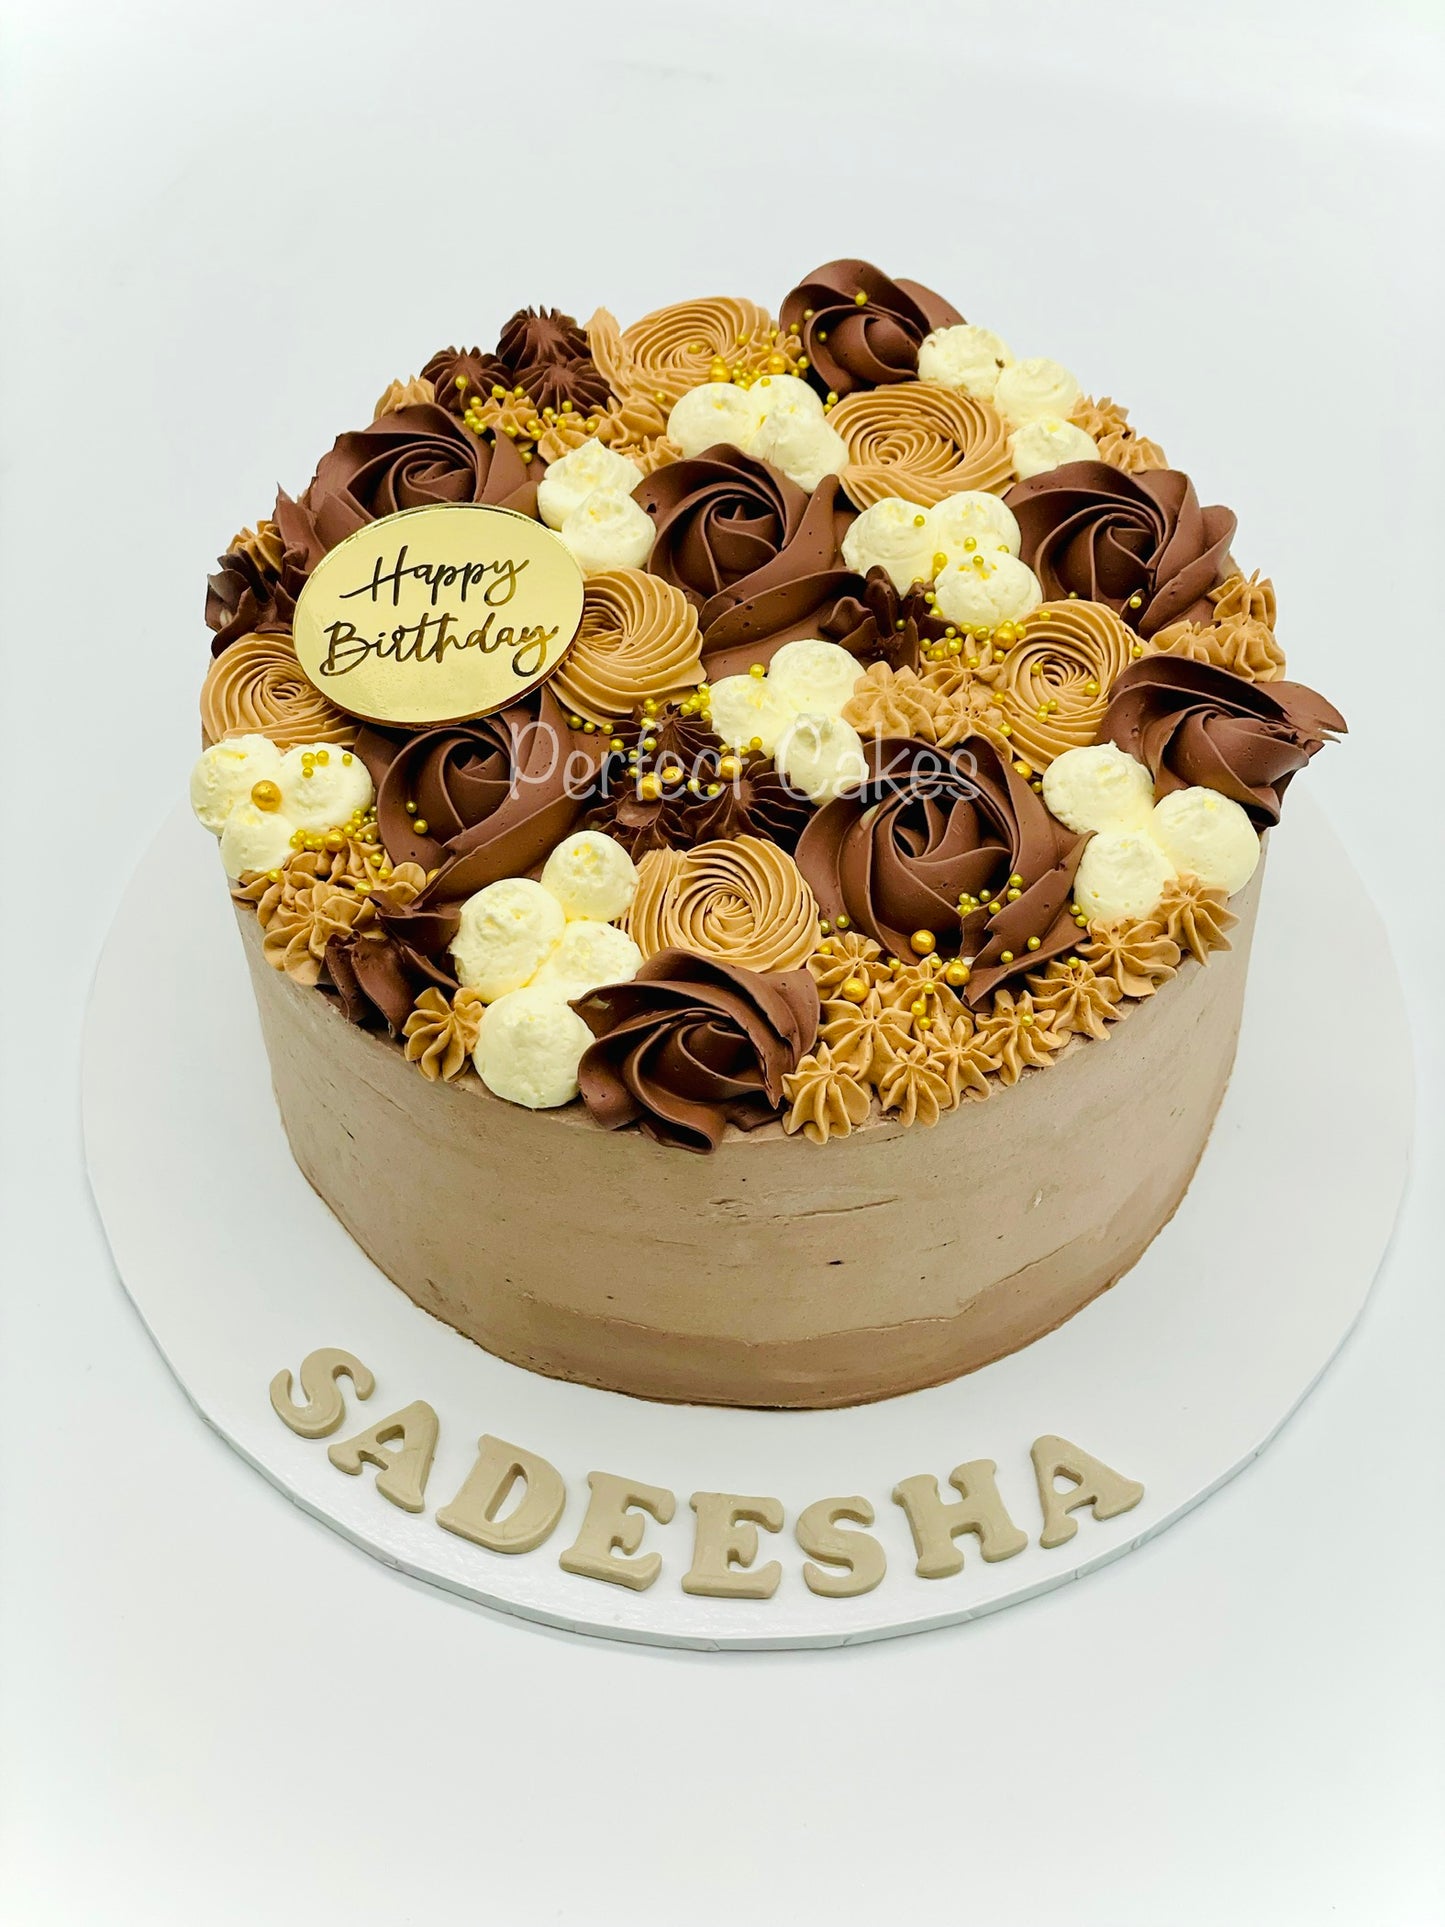 Share more than 163 archies cake delivery - awesomeenglish.edu.vn